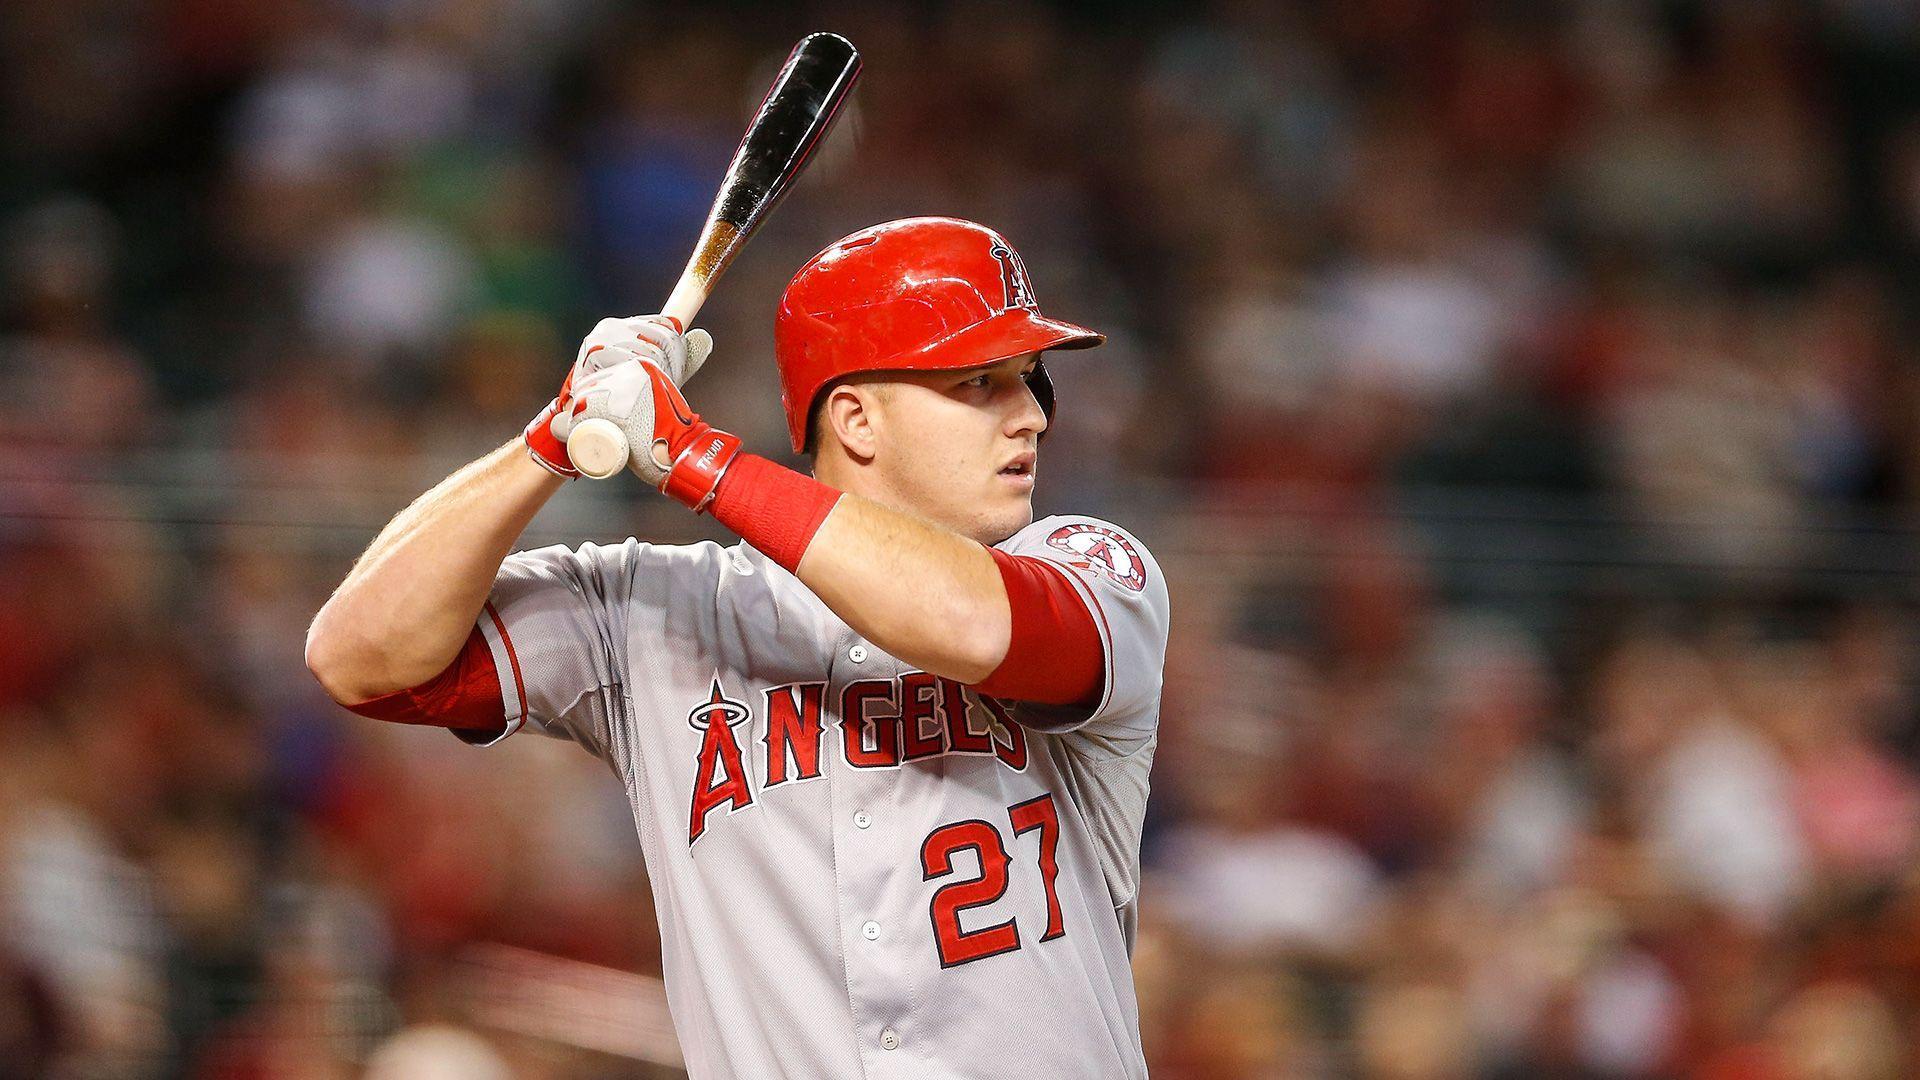 Mike Trout 2017 Wallpapers - Wallpaper Cave